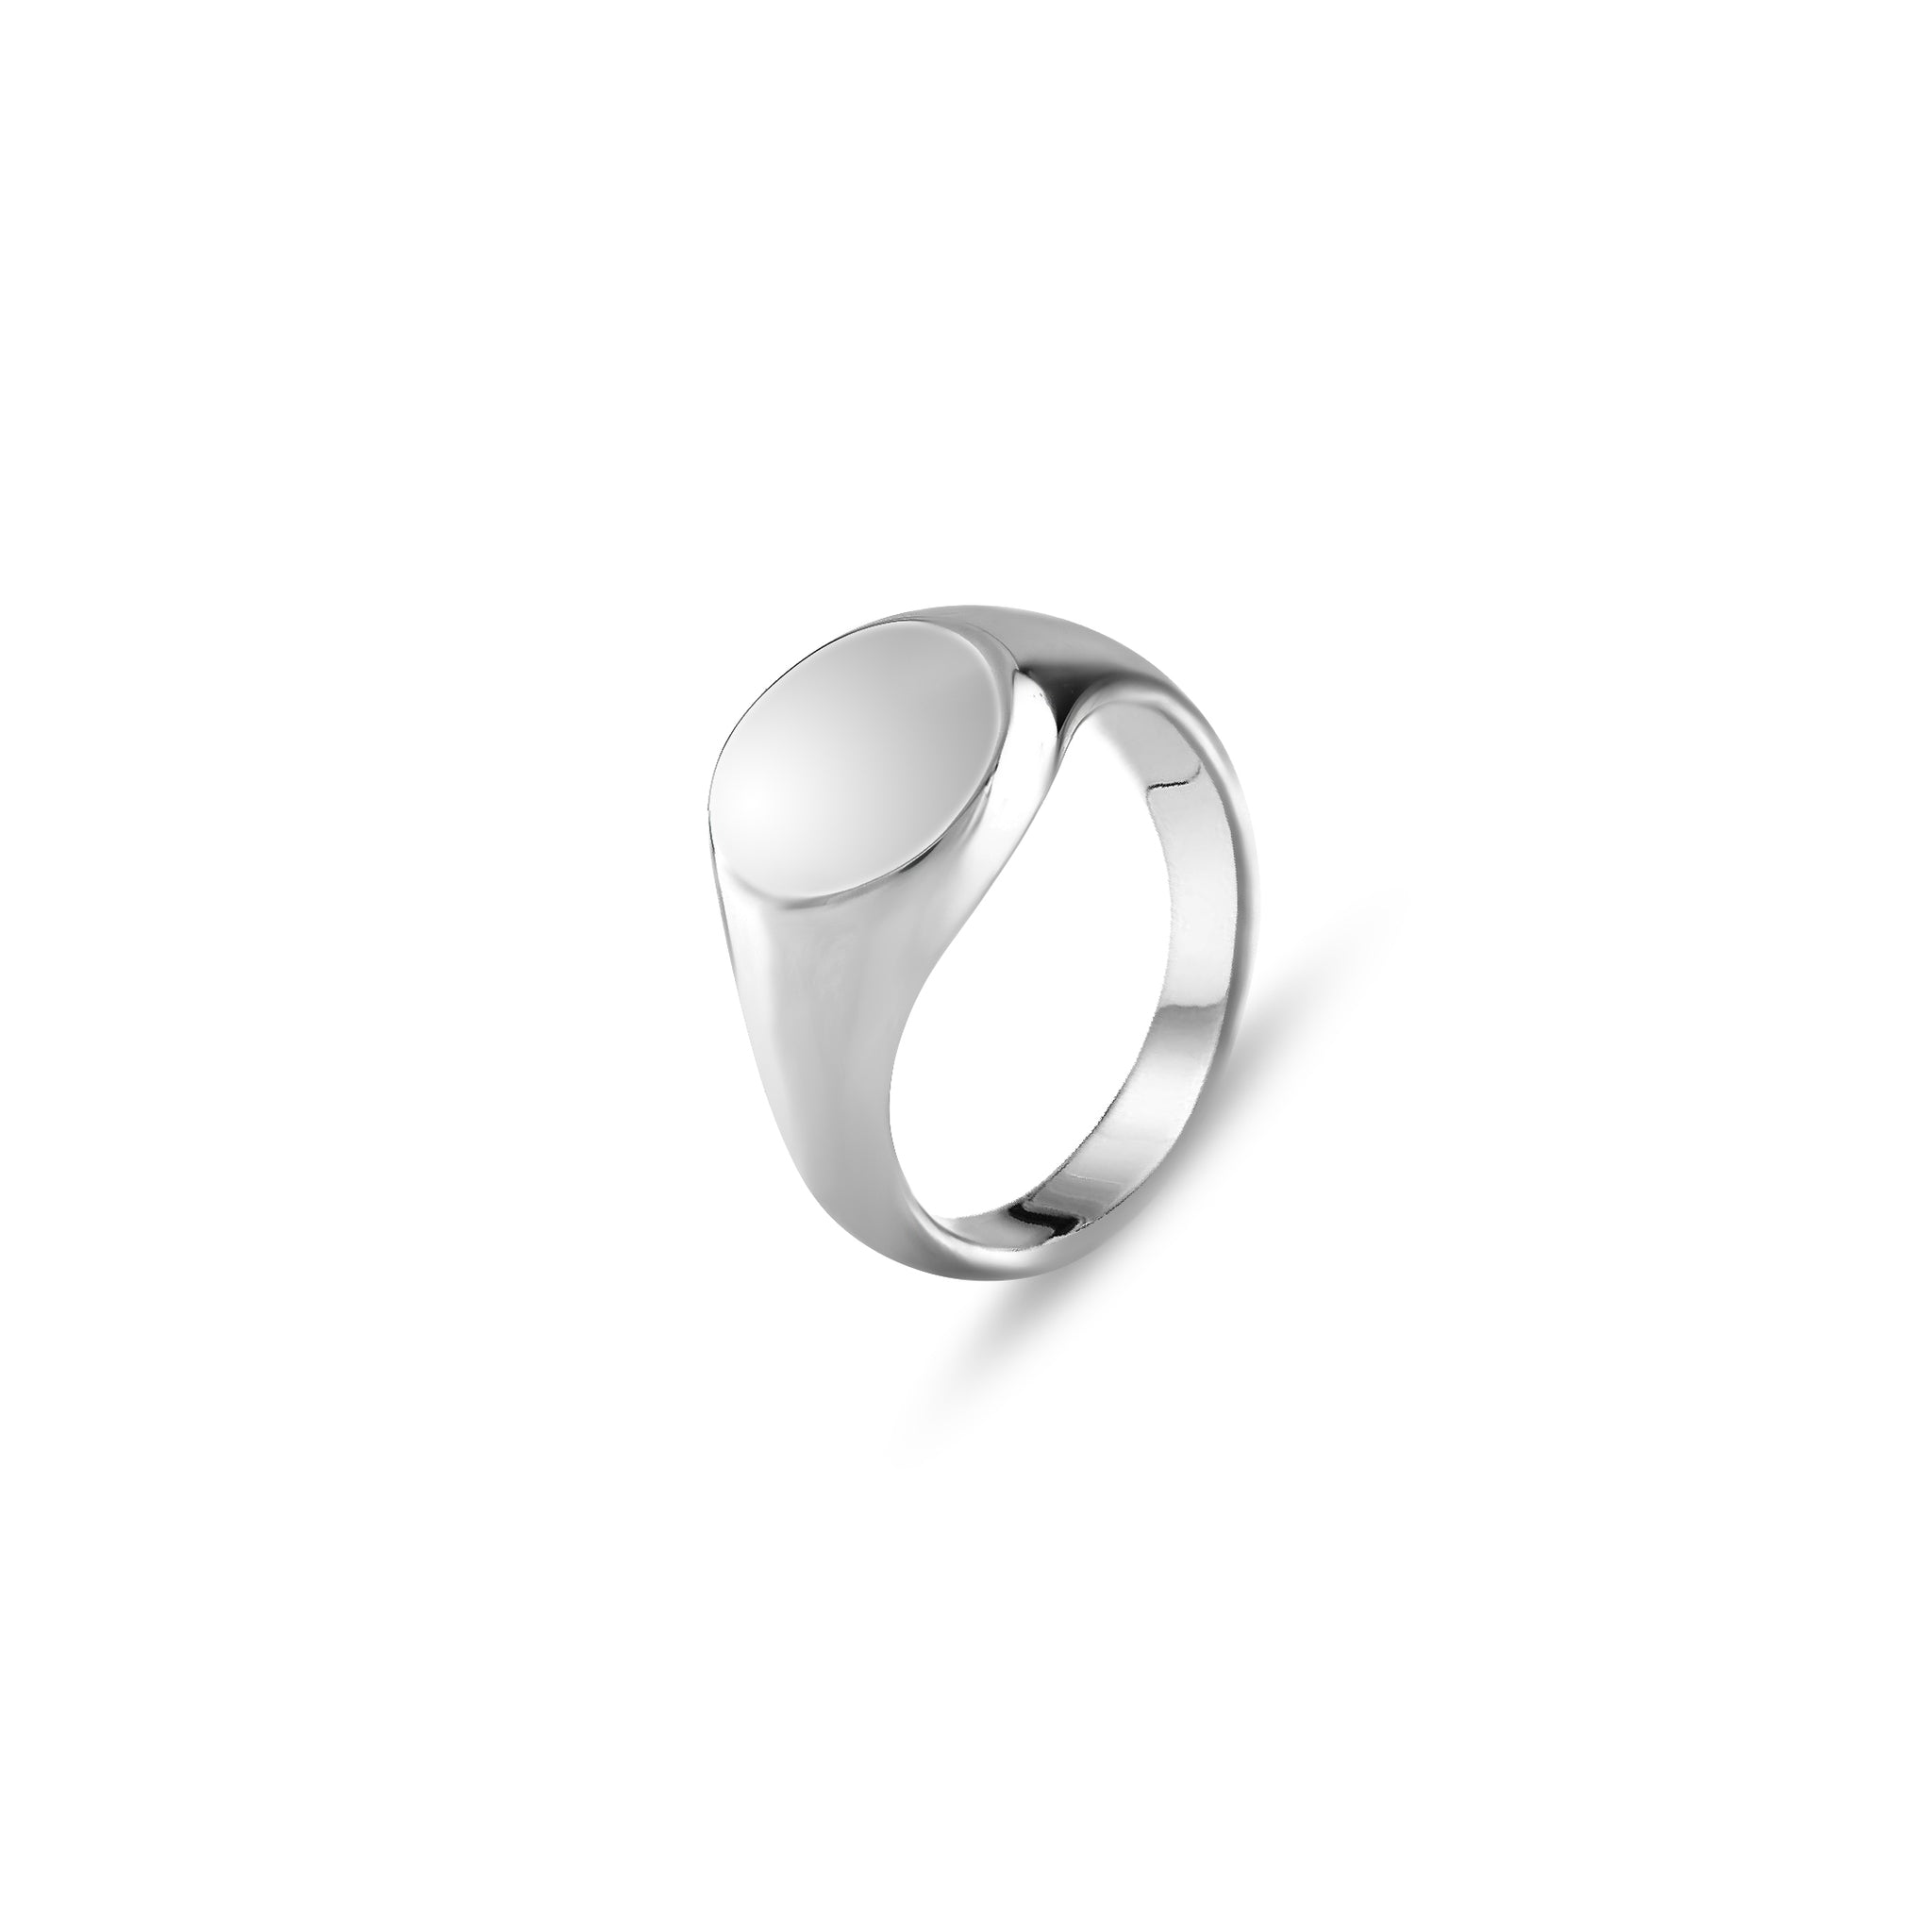 Silver 11mm Round Signet Ring